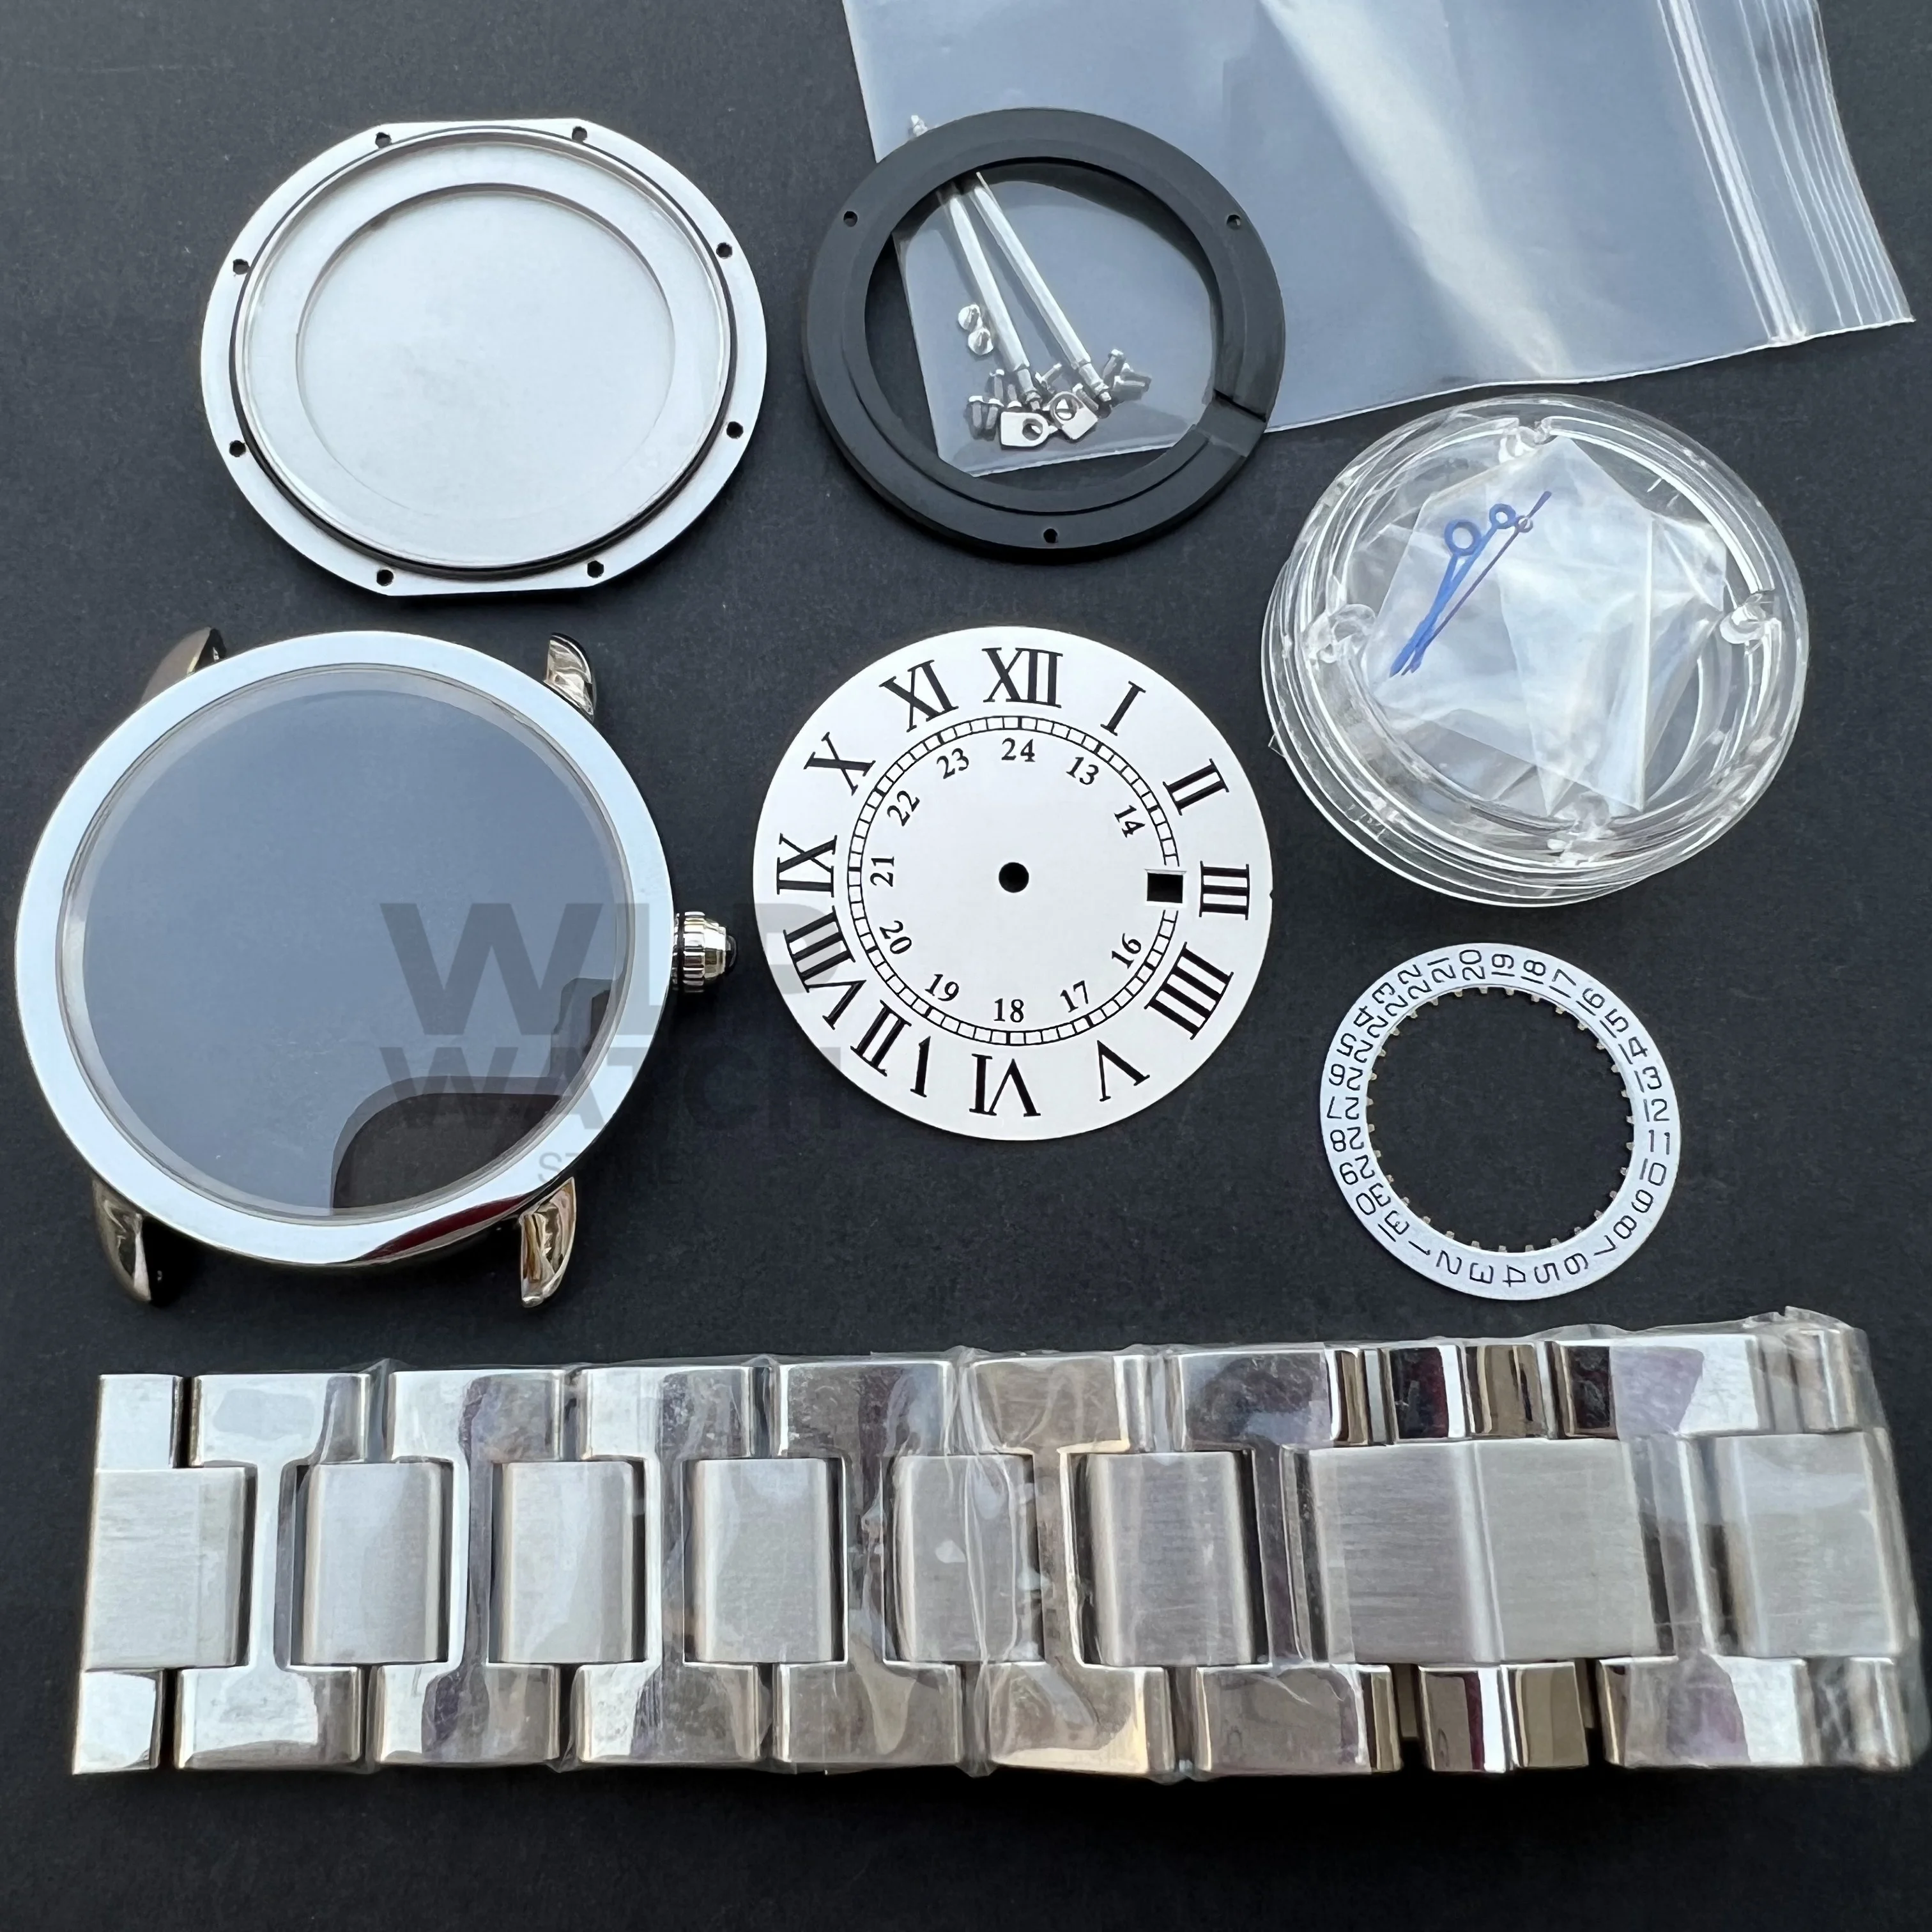 

New 36mm Assemble Watch Case Set for ETA 2824 2892 Movement Watch Accessories with Dial Stainless Steel Strap Sapphire Mirror